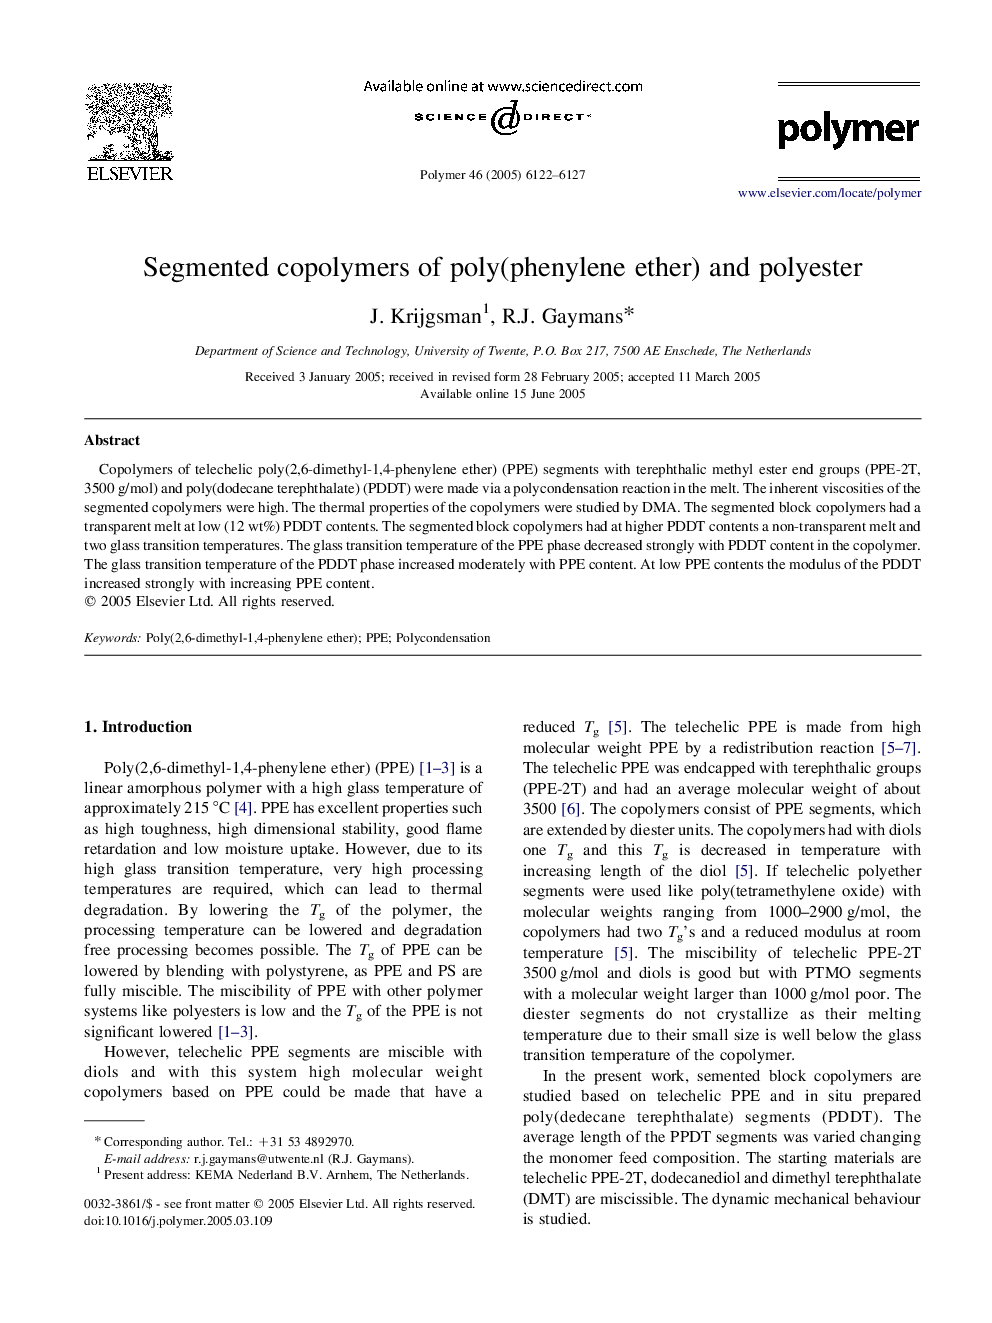 Segmented copolymers of poly(phenylene ether) and polyester